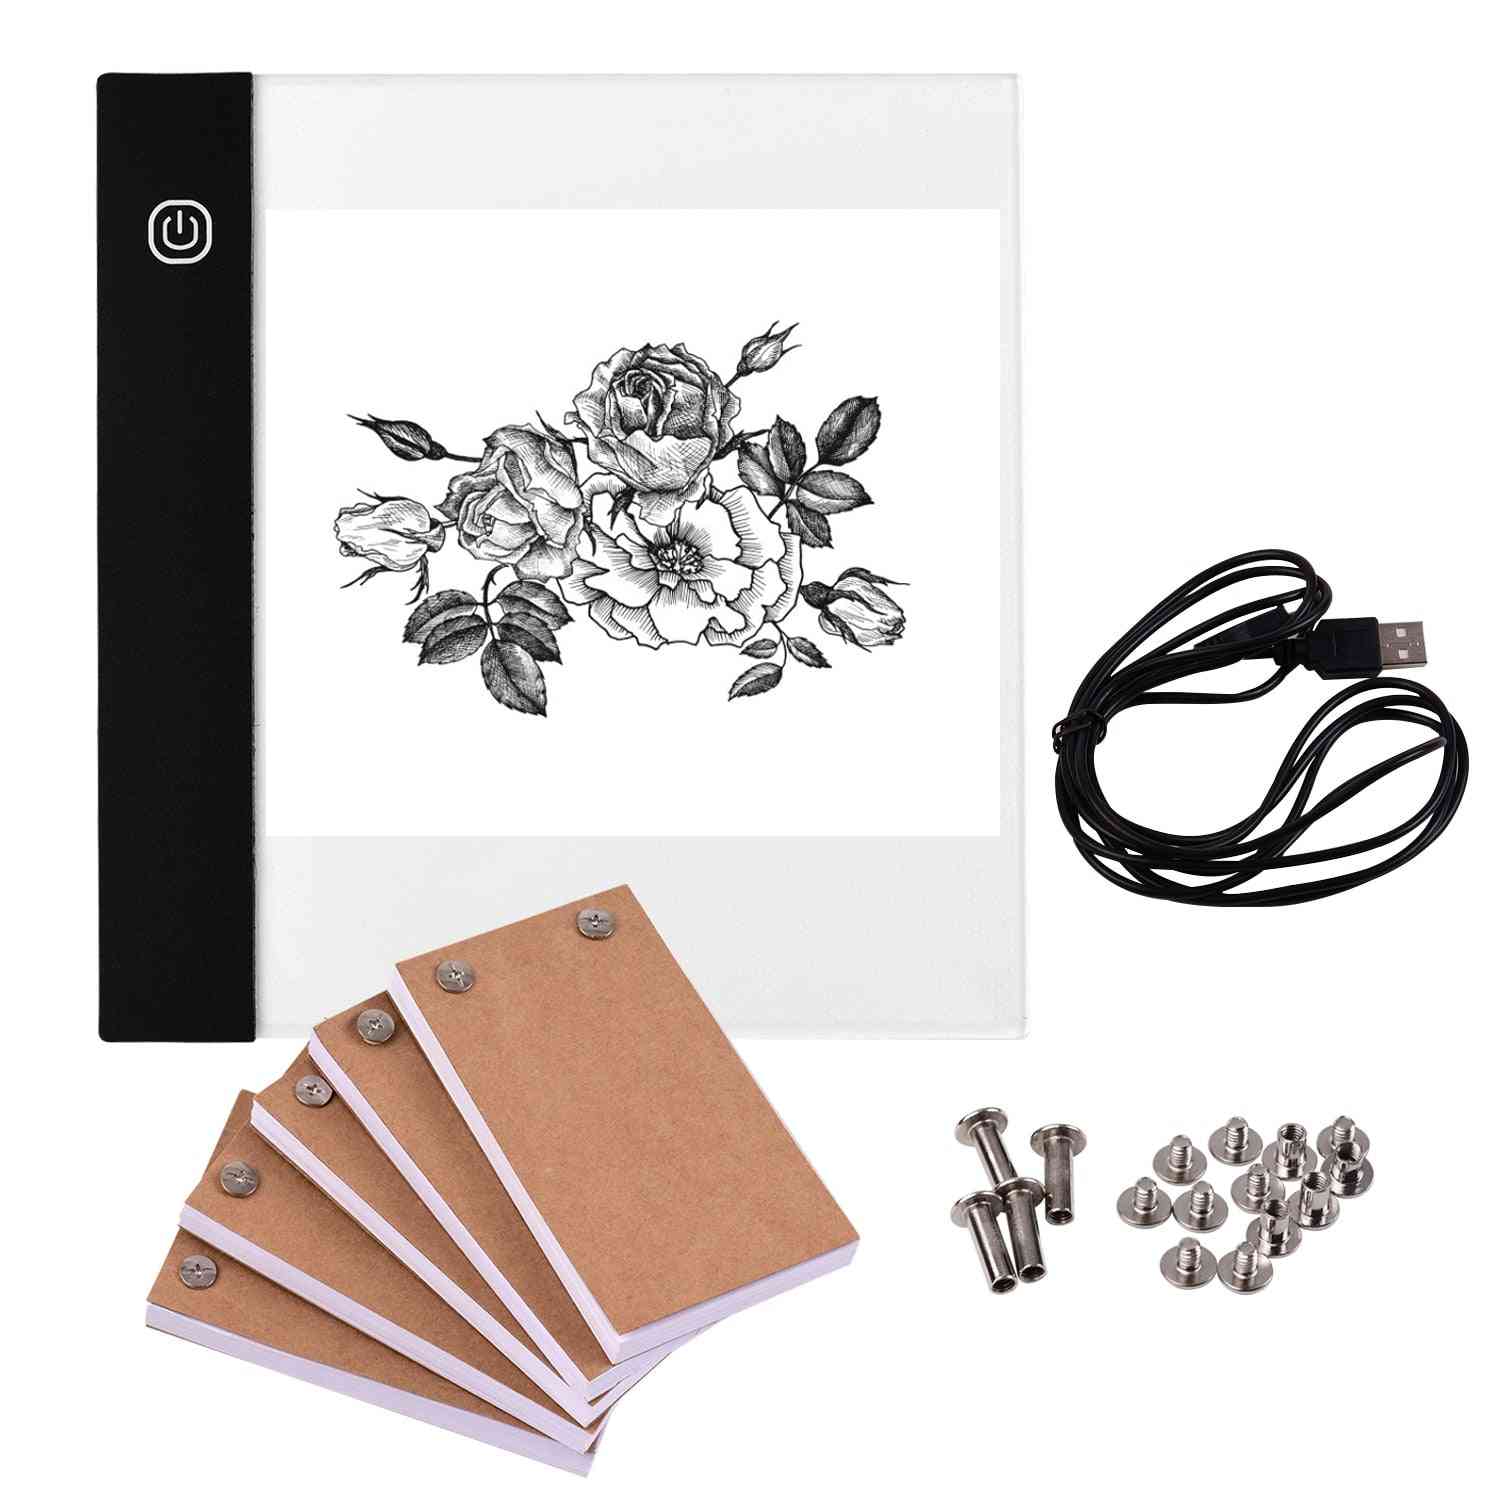 300 Sheets- Portable Led Light Pad, Flipbook Paper With Binding Screws